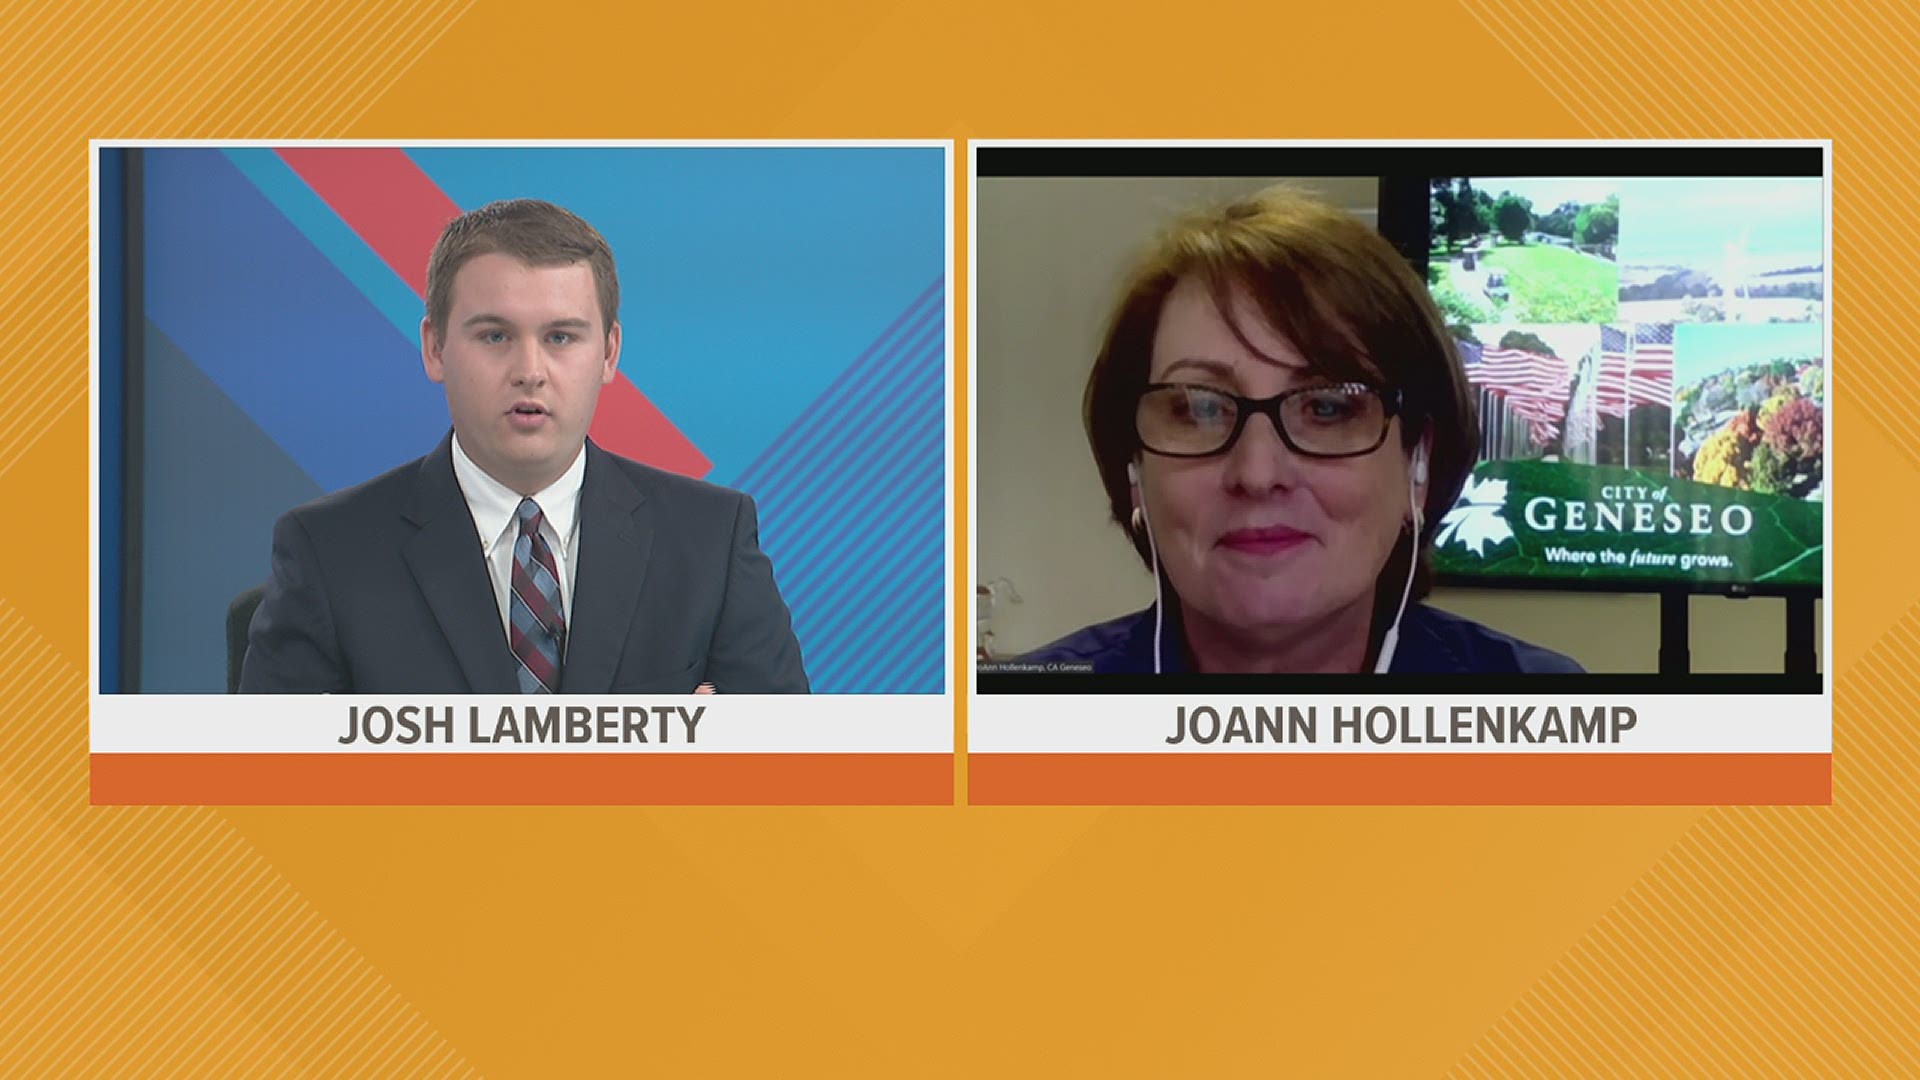 City Administrator JoAnn Hollenkamp joined us during GMQC at 11 on June 10th.